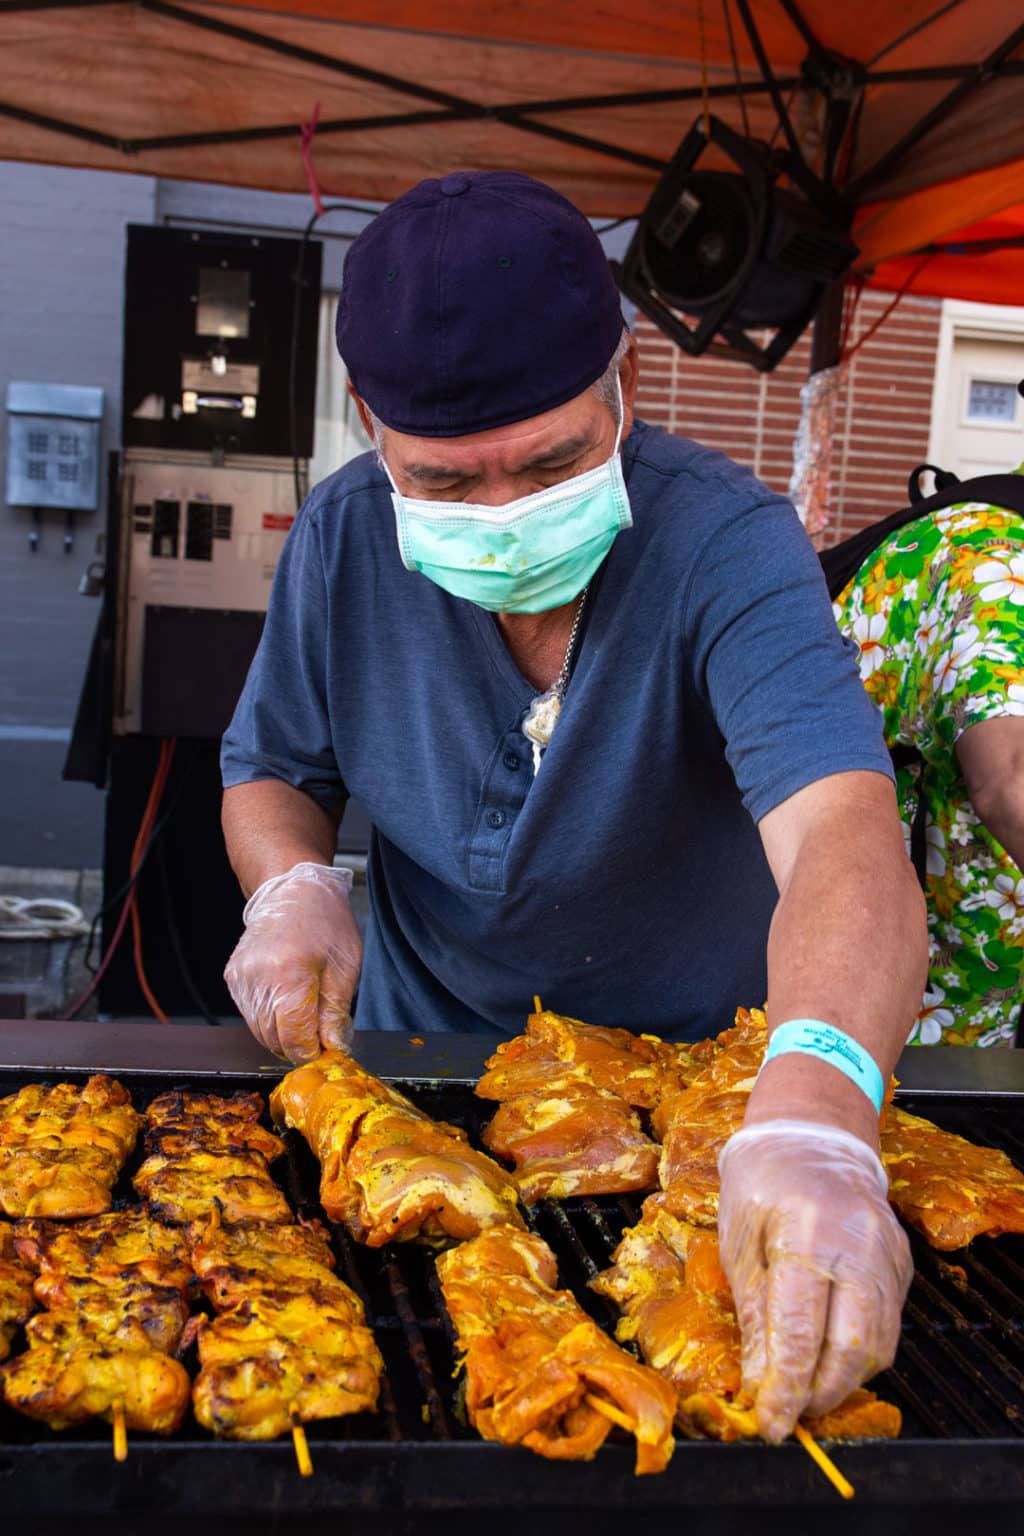 A vendor cooks meat on a grill while wearing a backwards hat and a medical mask.